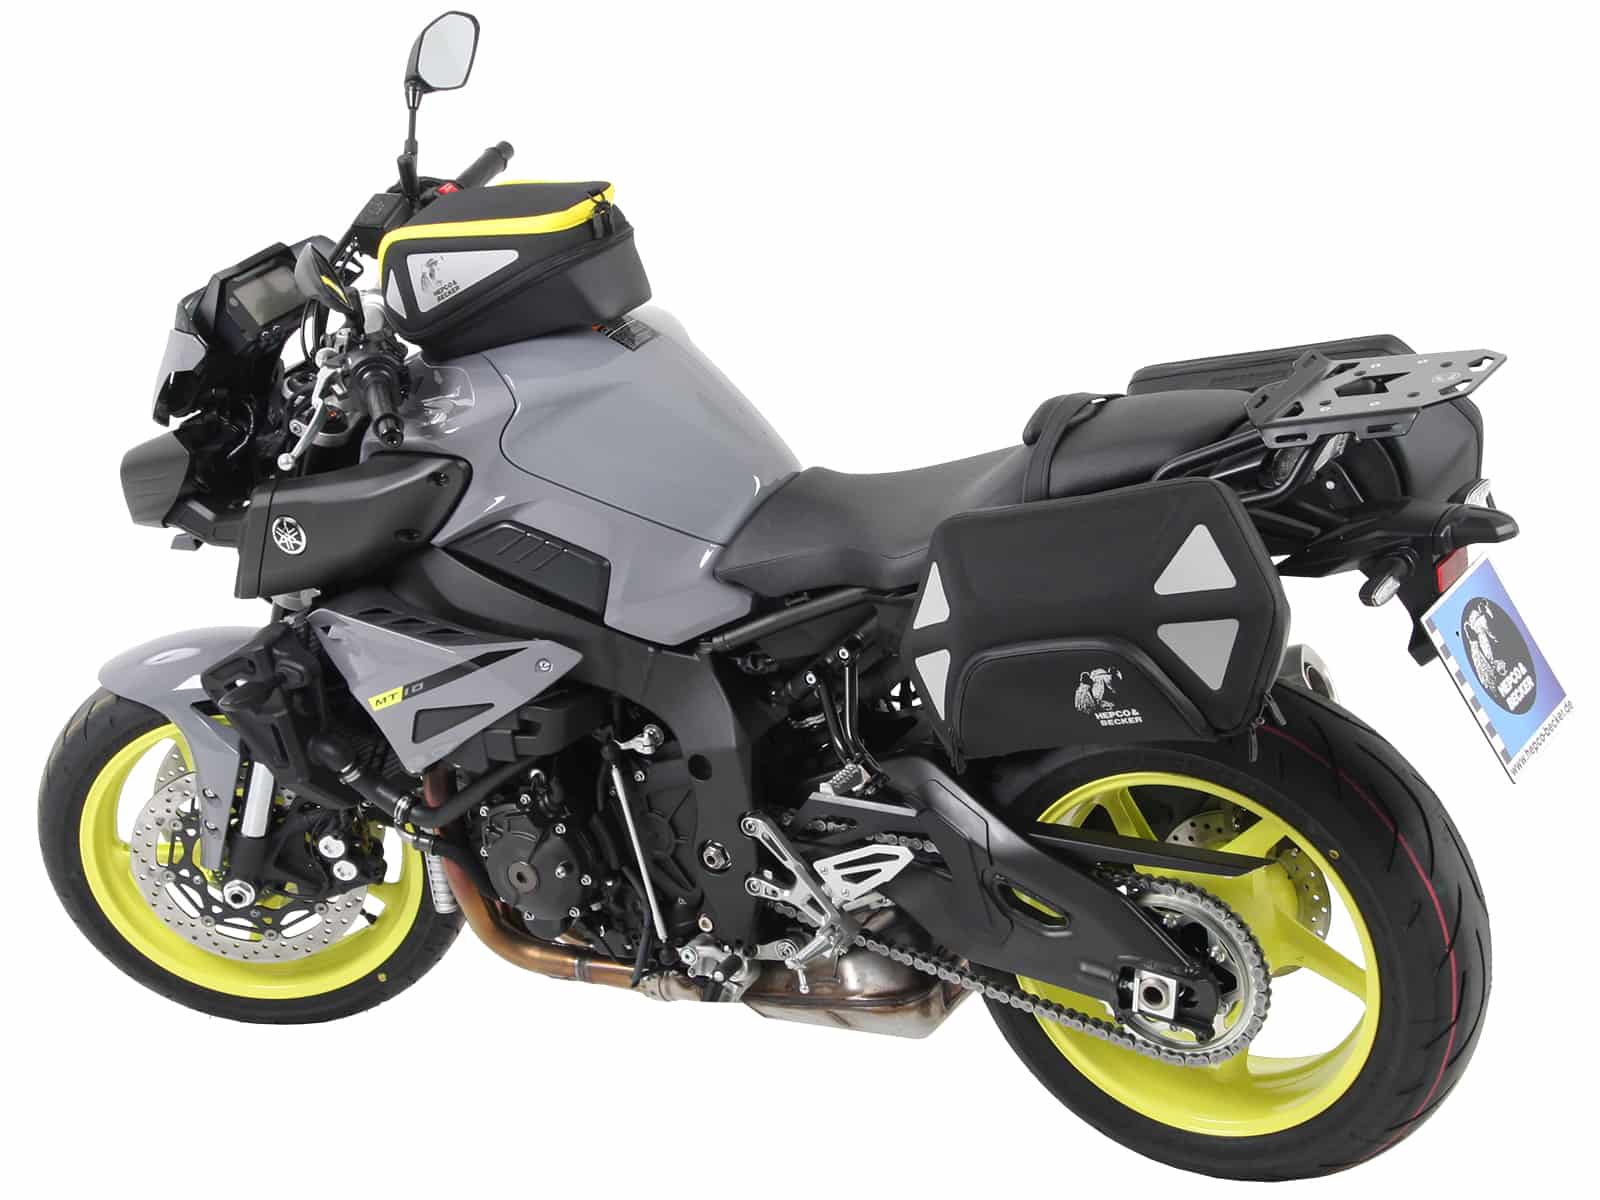 C-Bow sidecarrier for Yamaha MT-10 (2016-2021)